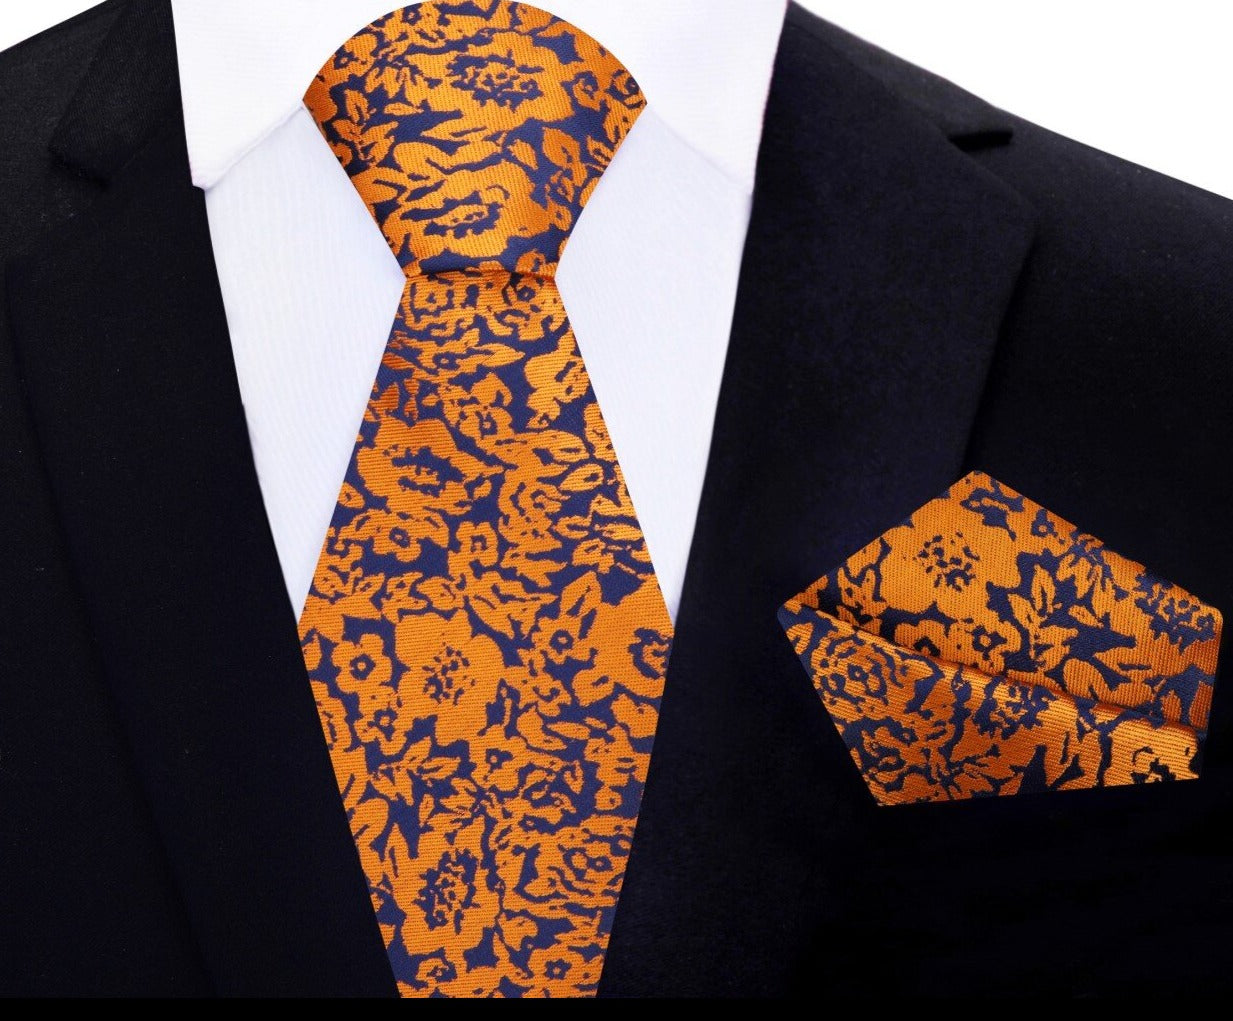 A deep blue and rusty orange floral tie and pocket square